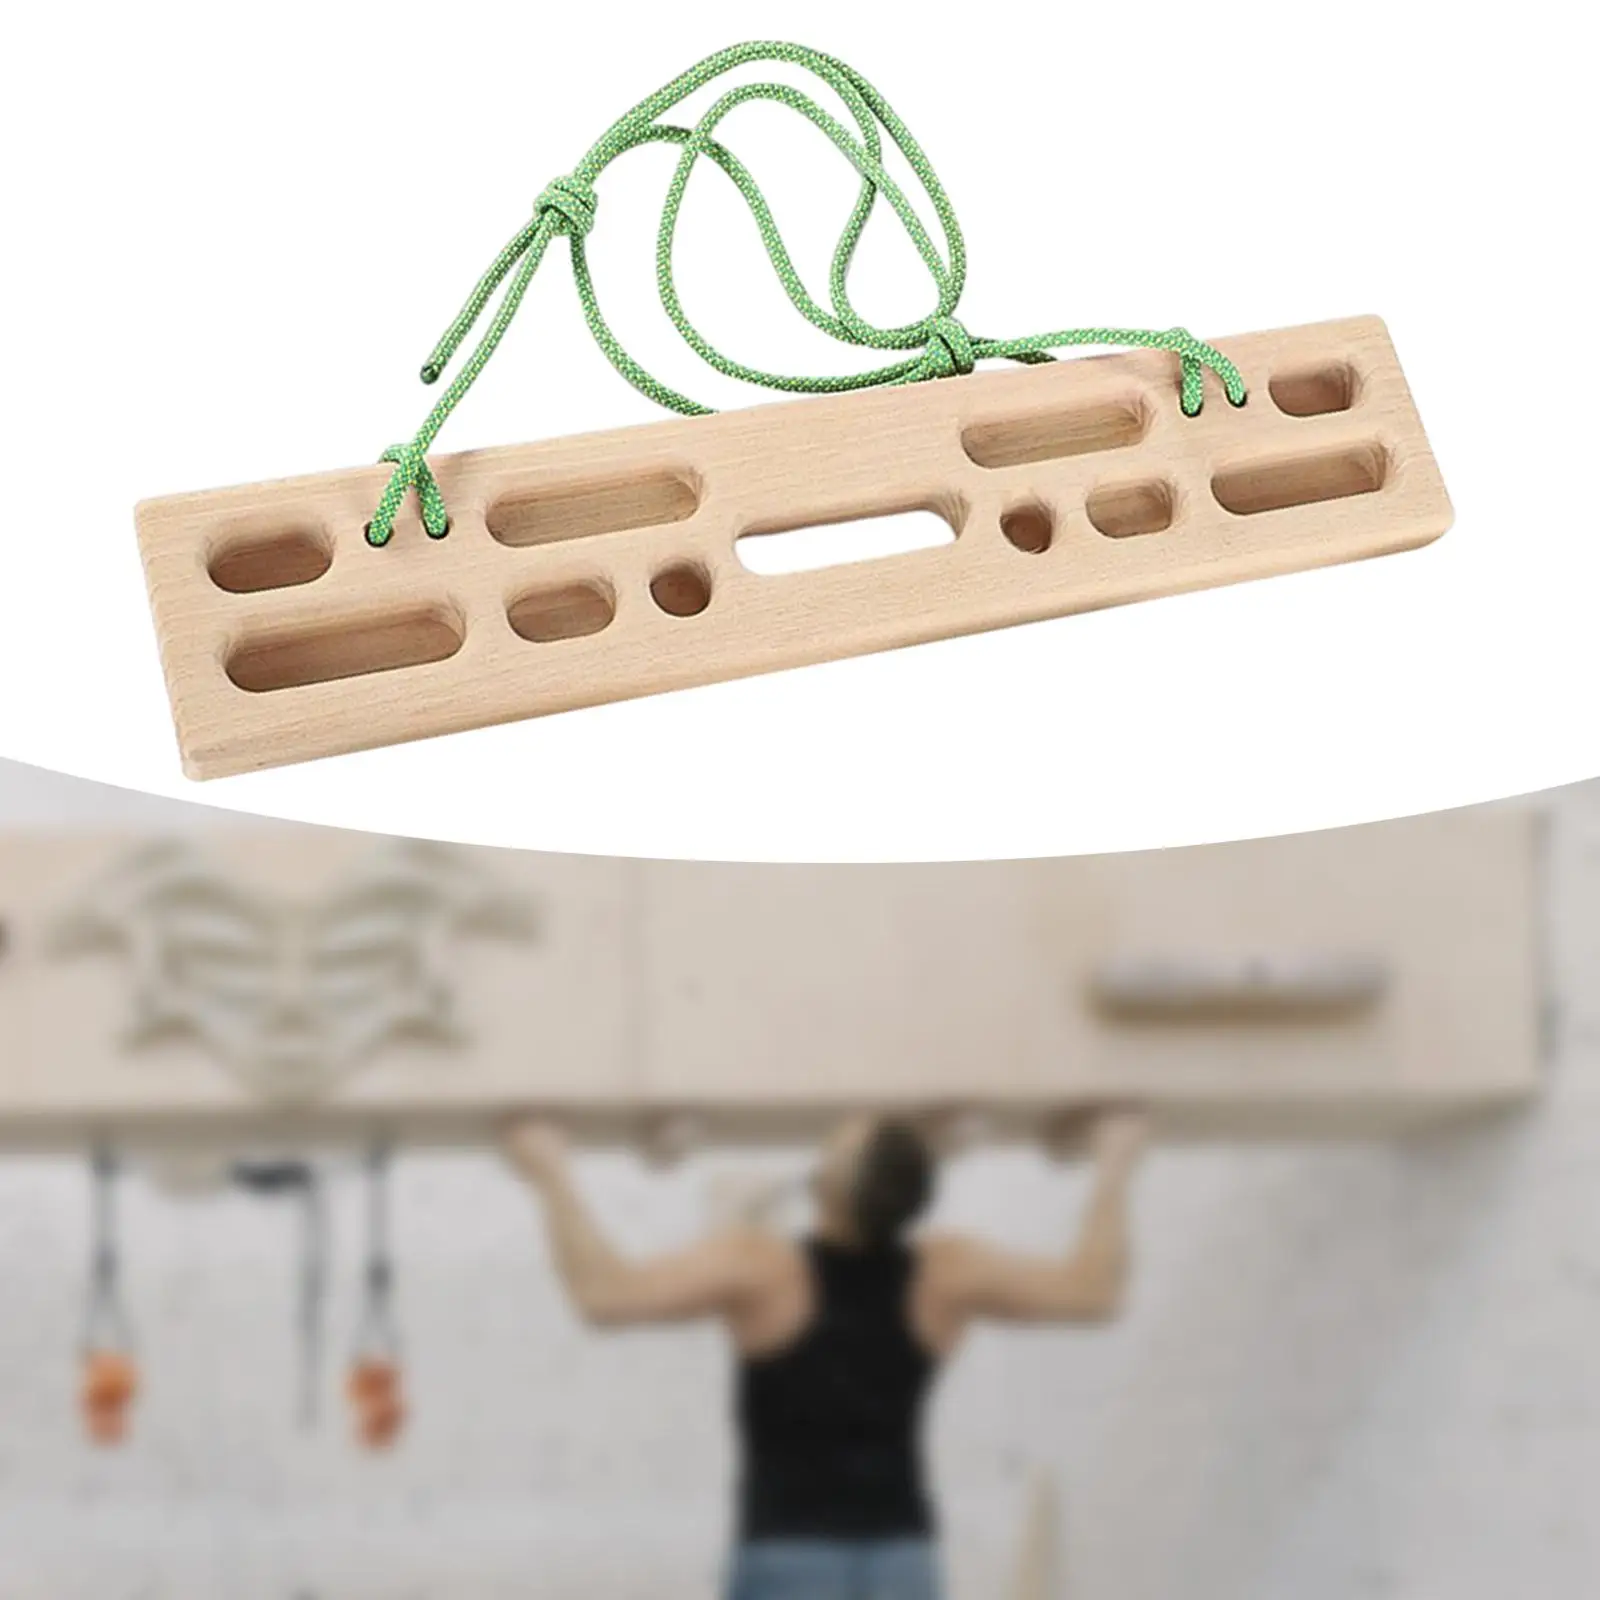 Climbing Hangboard Climbing Fingerboard Upper Body Workouts Pull up Board for Home Climbers Bouldering Beginners Doorway